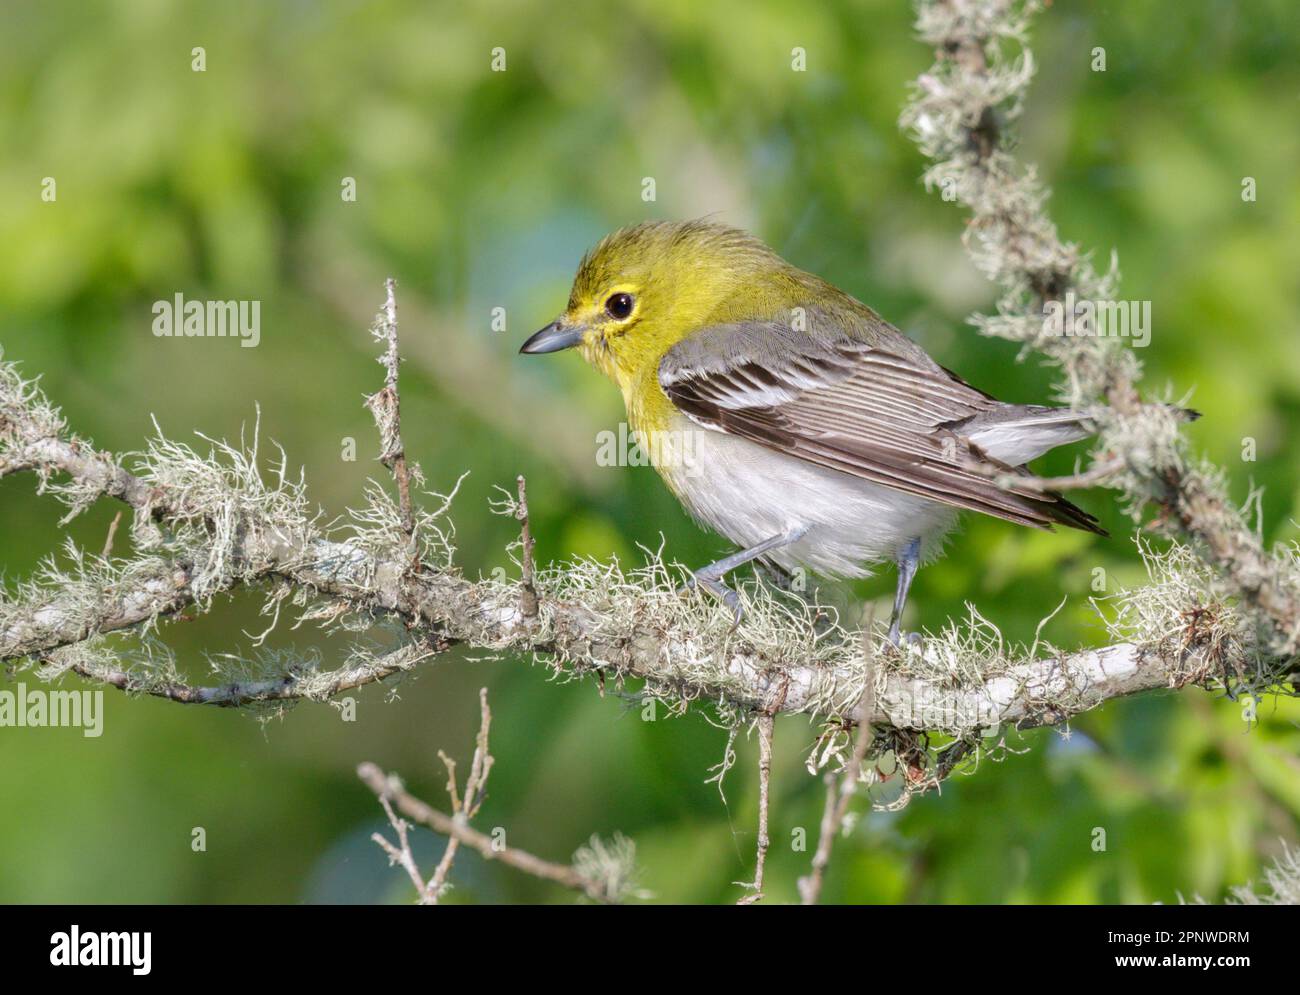 Yellow-throated vireo (Vireo flavifrons) during spring migration in Galveston, Texas, USA. Stock Photo